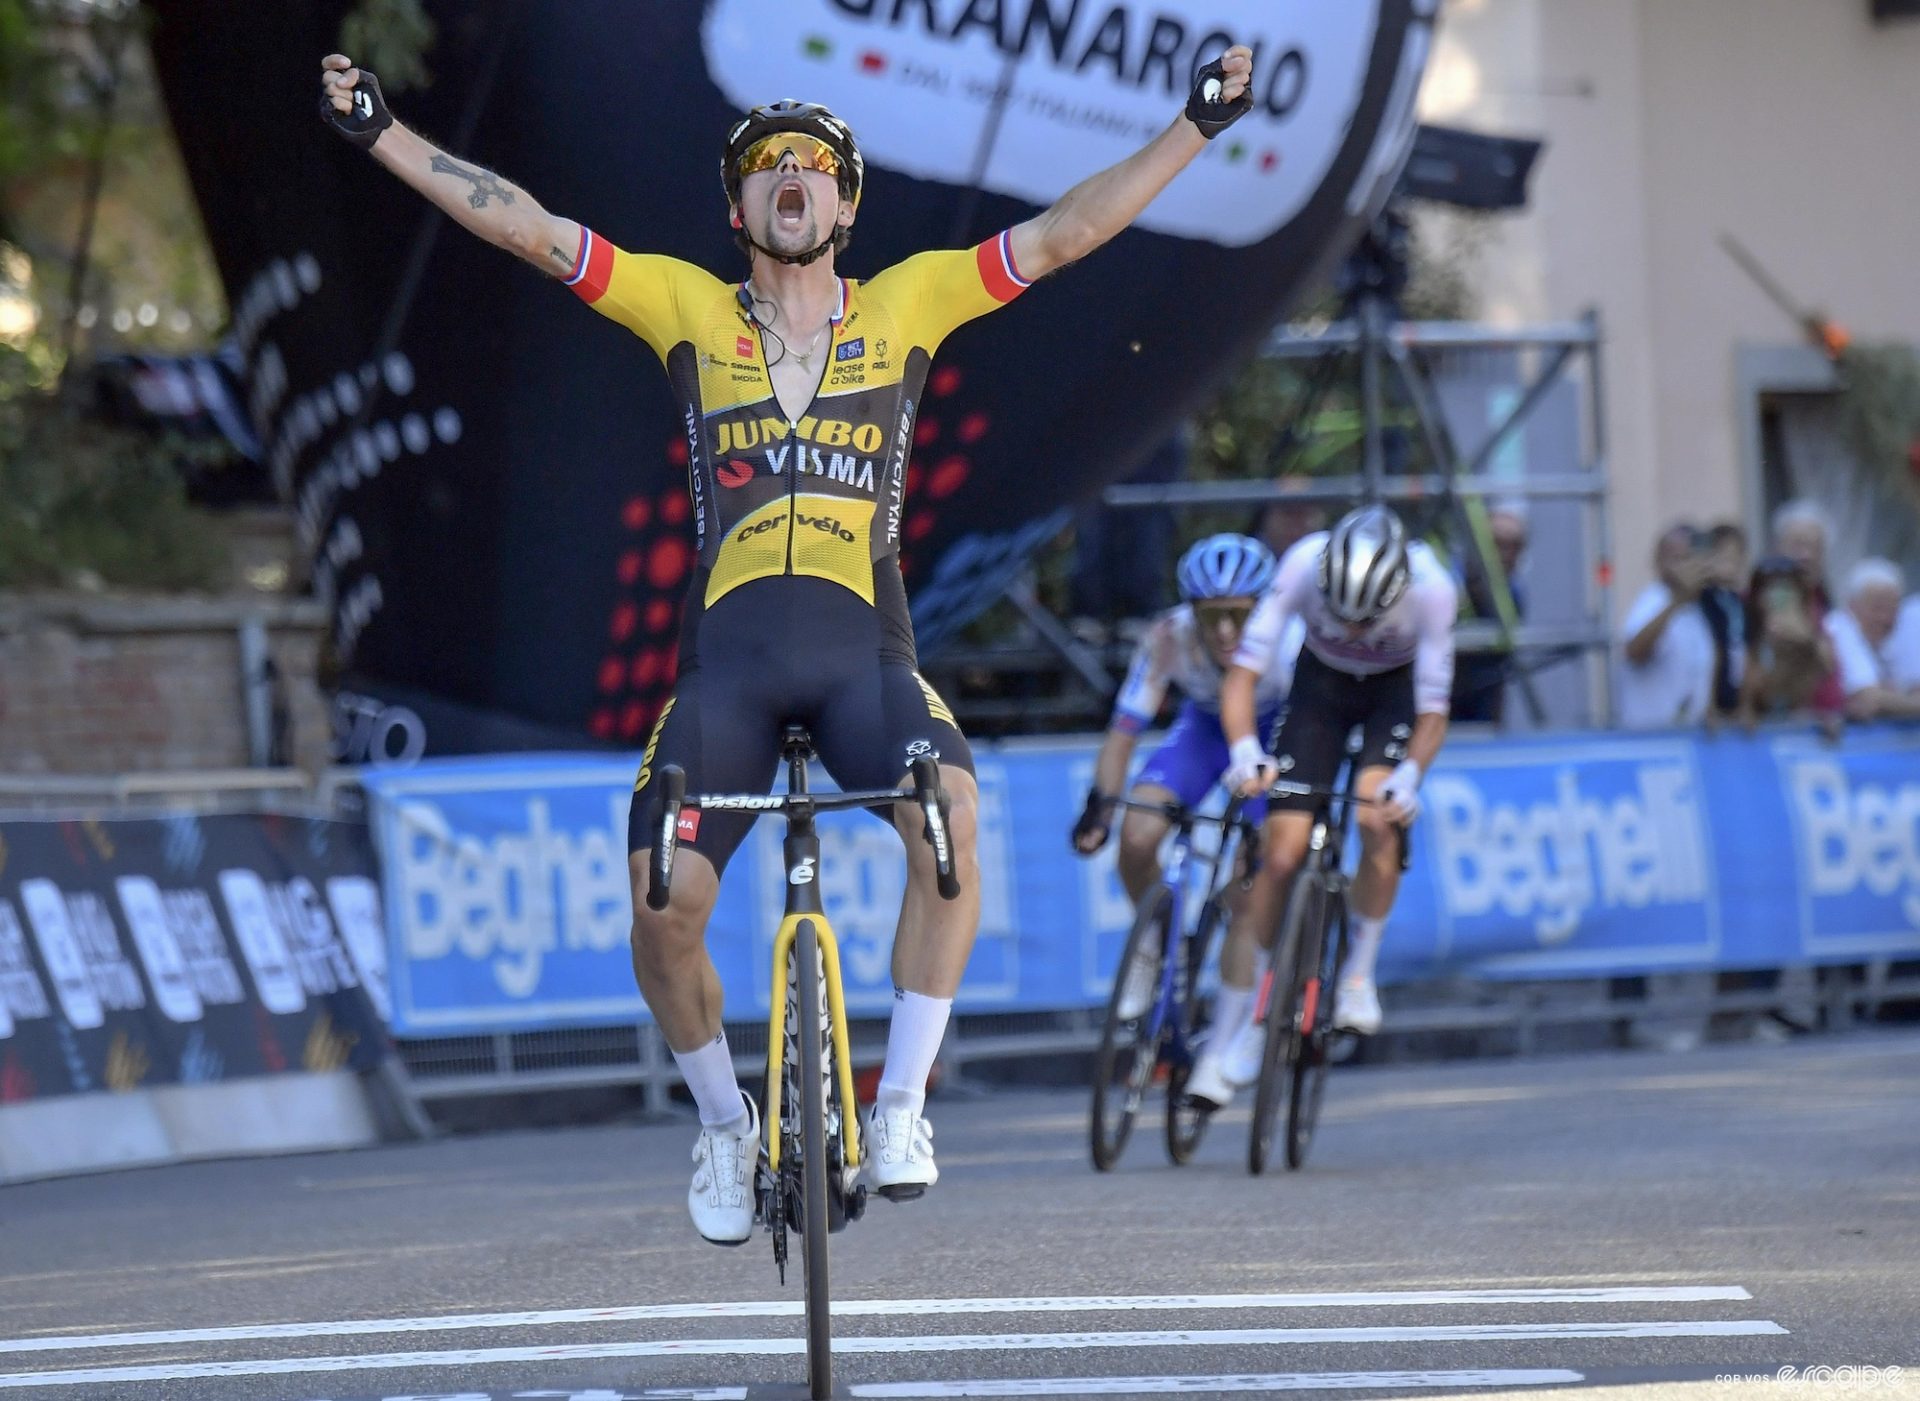 Primož Roglič wins the Giro dell'Emilia. He is crossing the line alone, arms up in a victory salute, head back in open-mouthed celebration, as Tadej Pogačar and Simon Yates sprint behind for second.